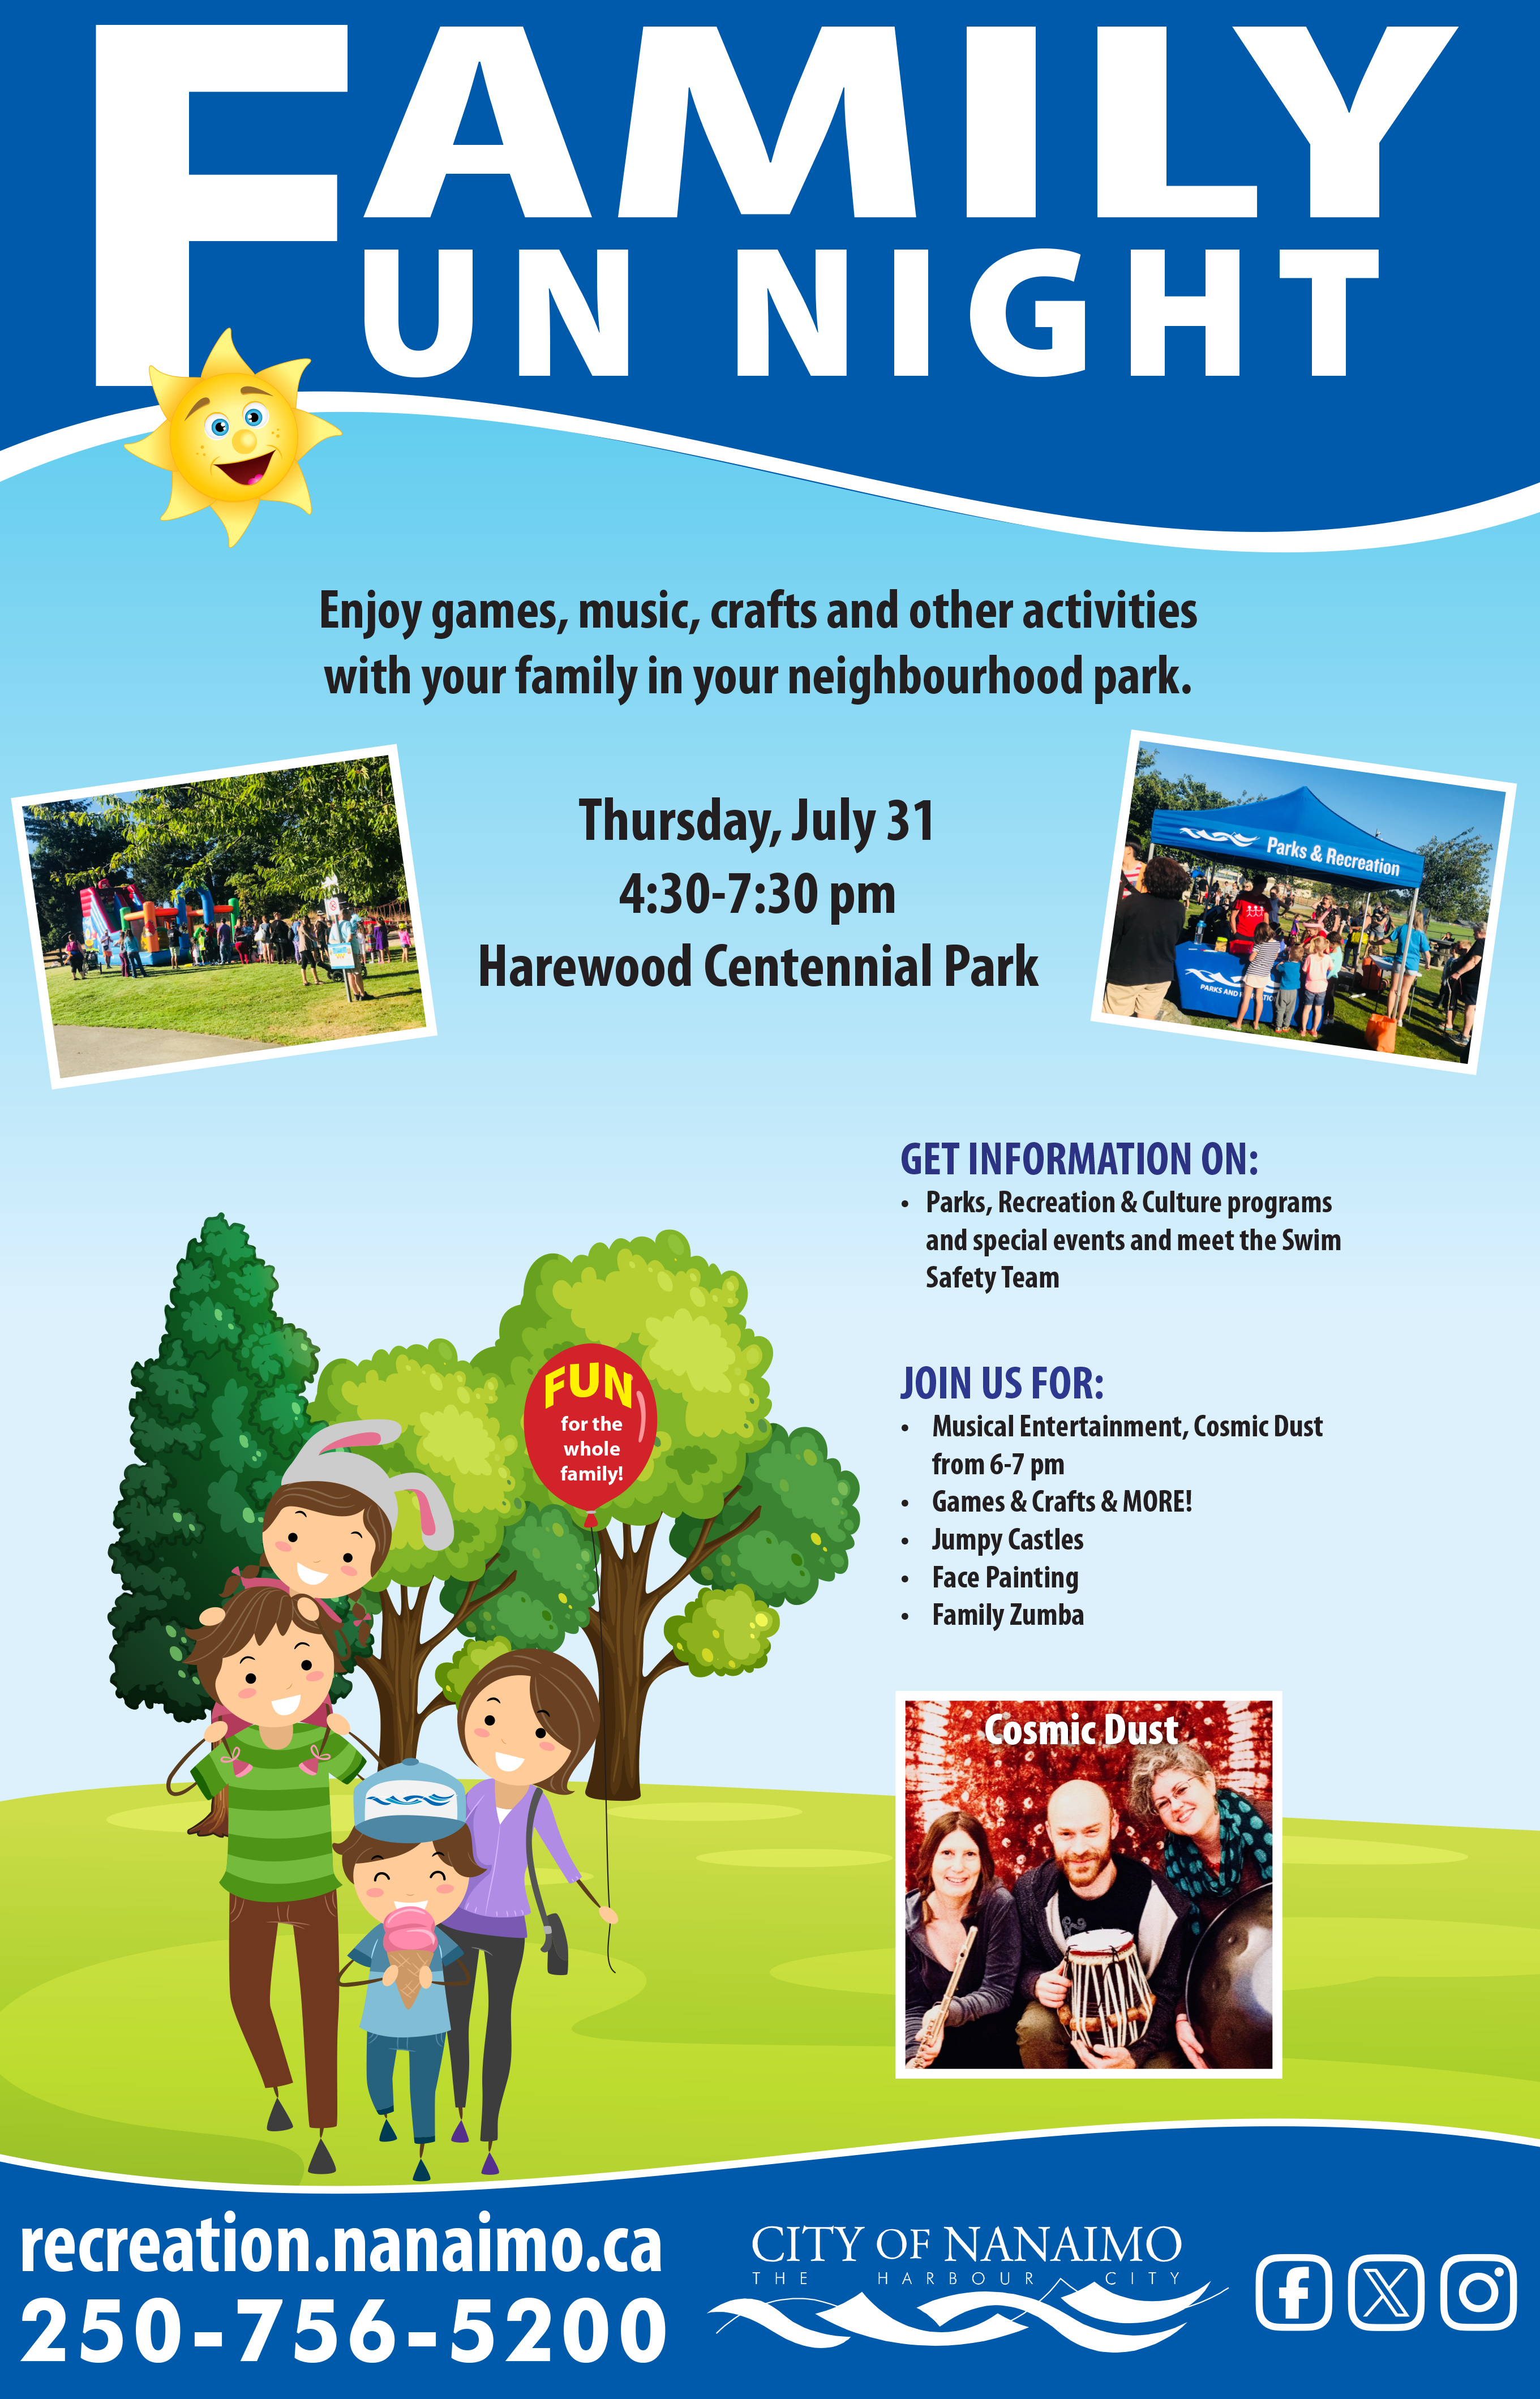 Free Family Fun Night on July 31 at Harewood Centennial Park